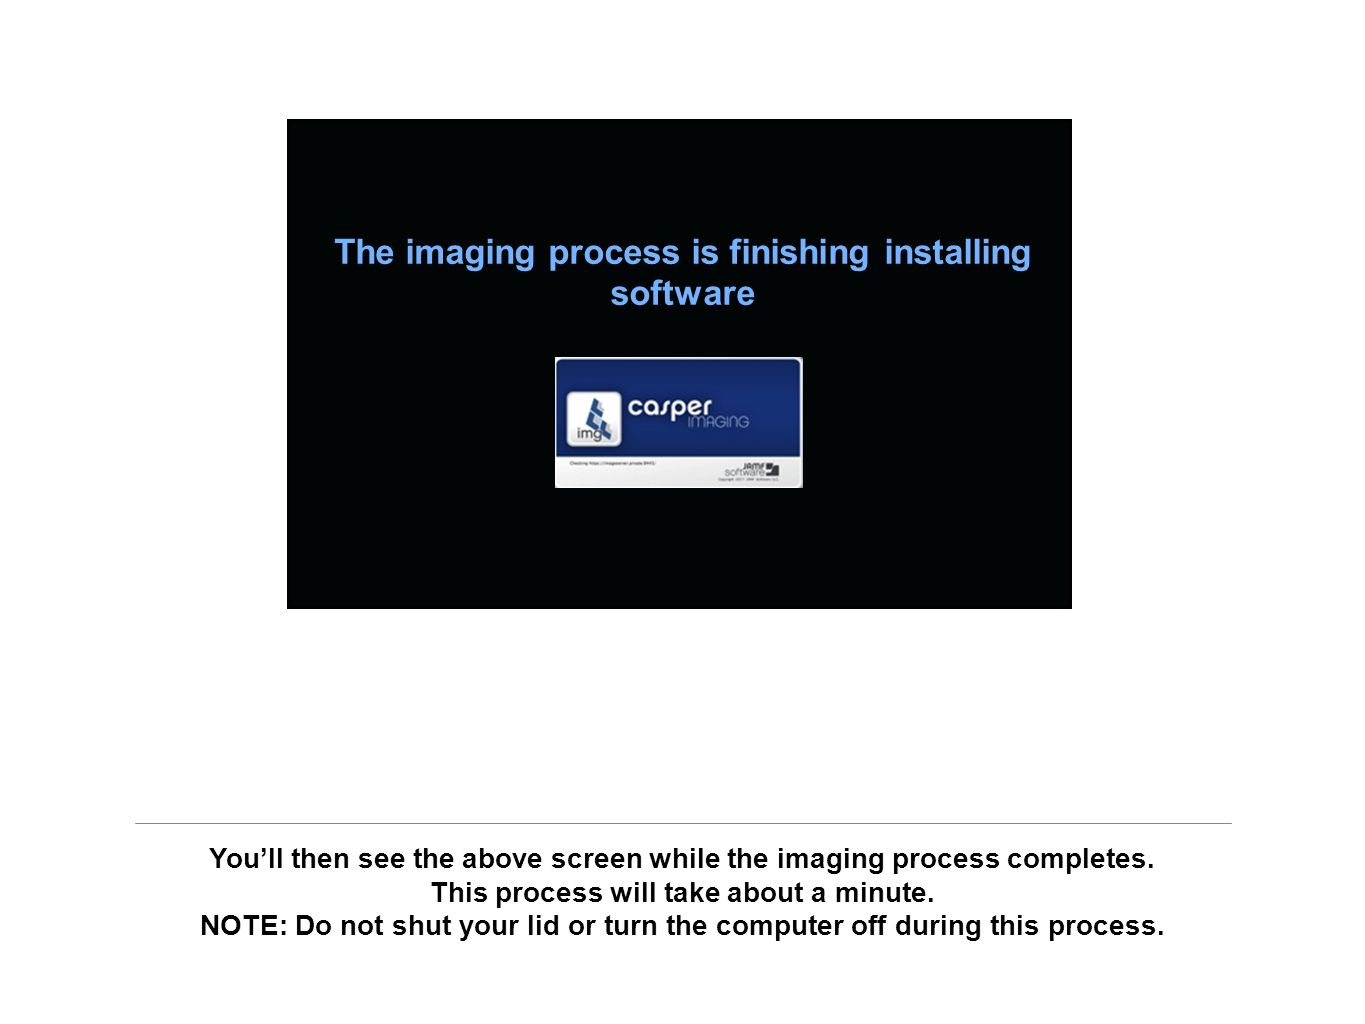 You’ll then see the above screen while the imaging process completes.